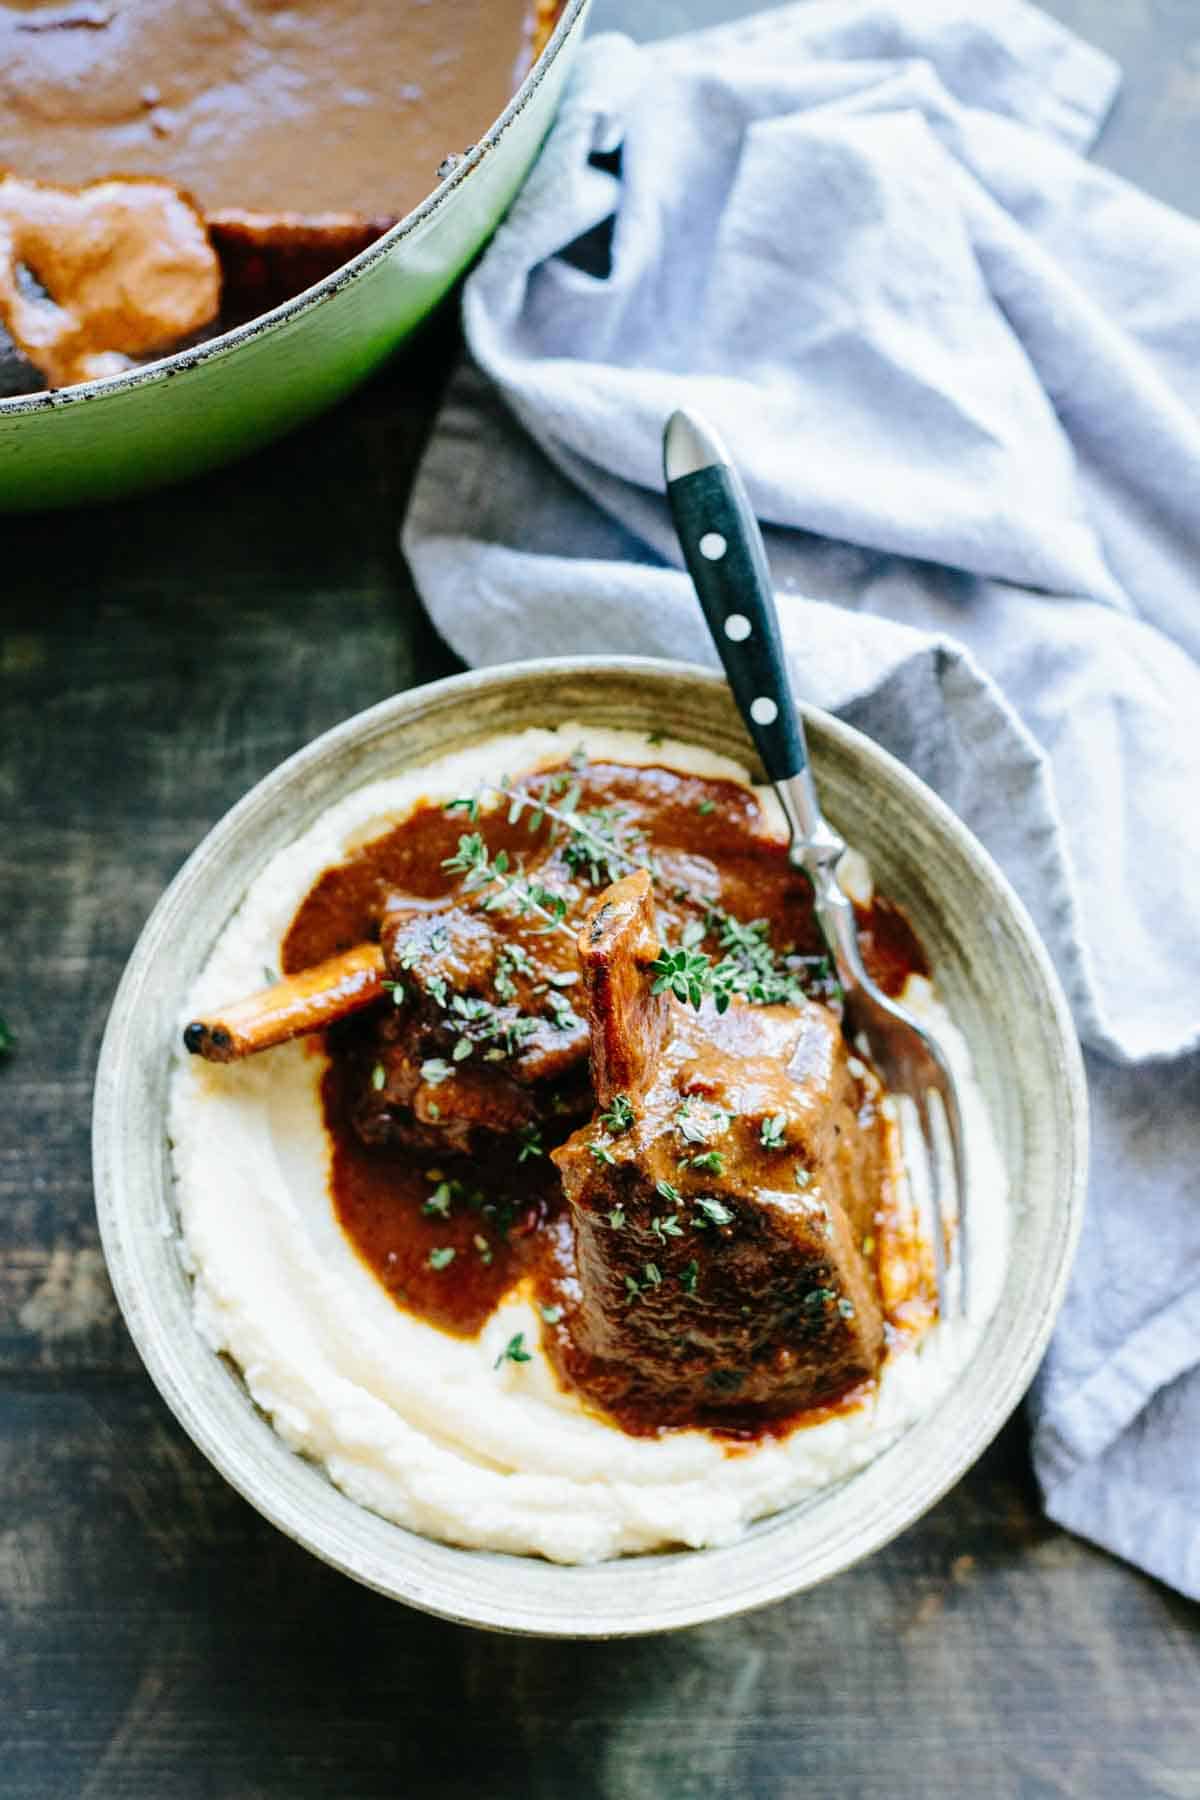 Braised beef dish served with savory sauce.